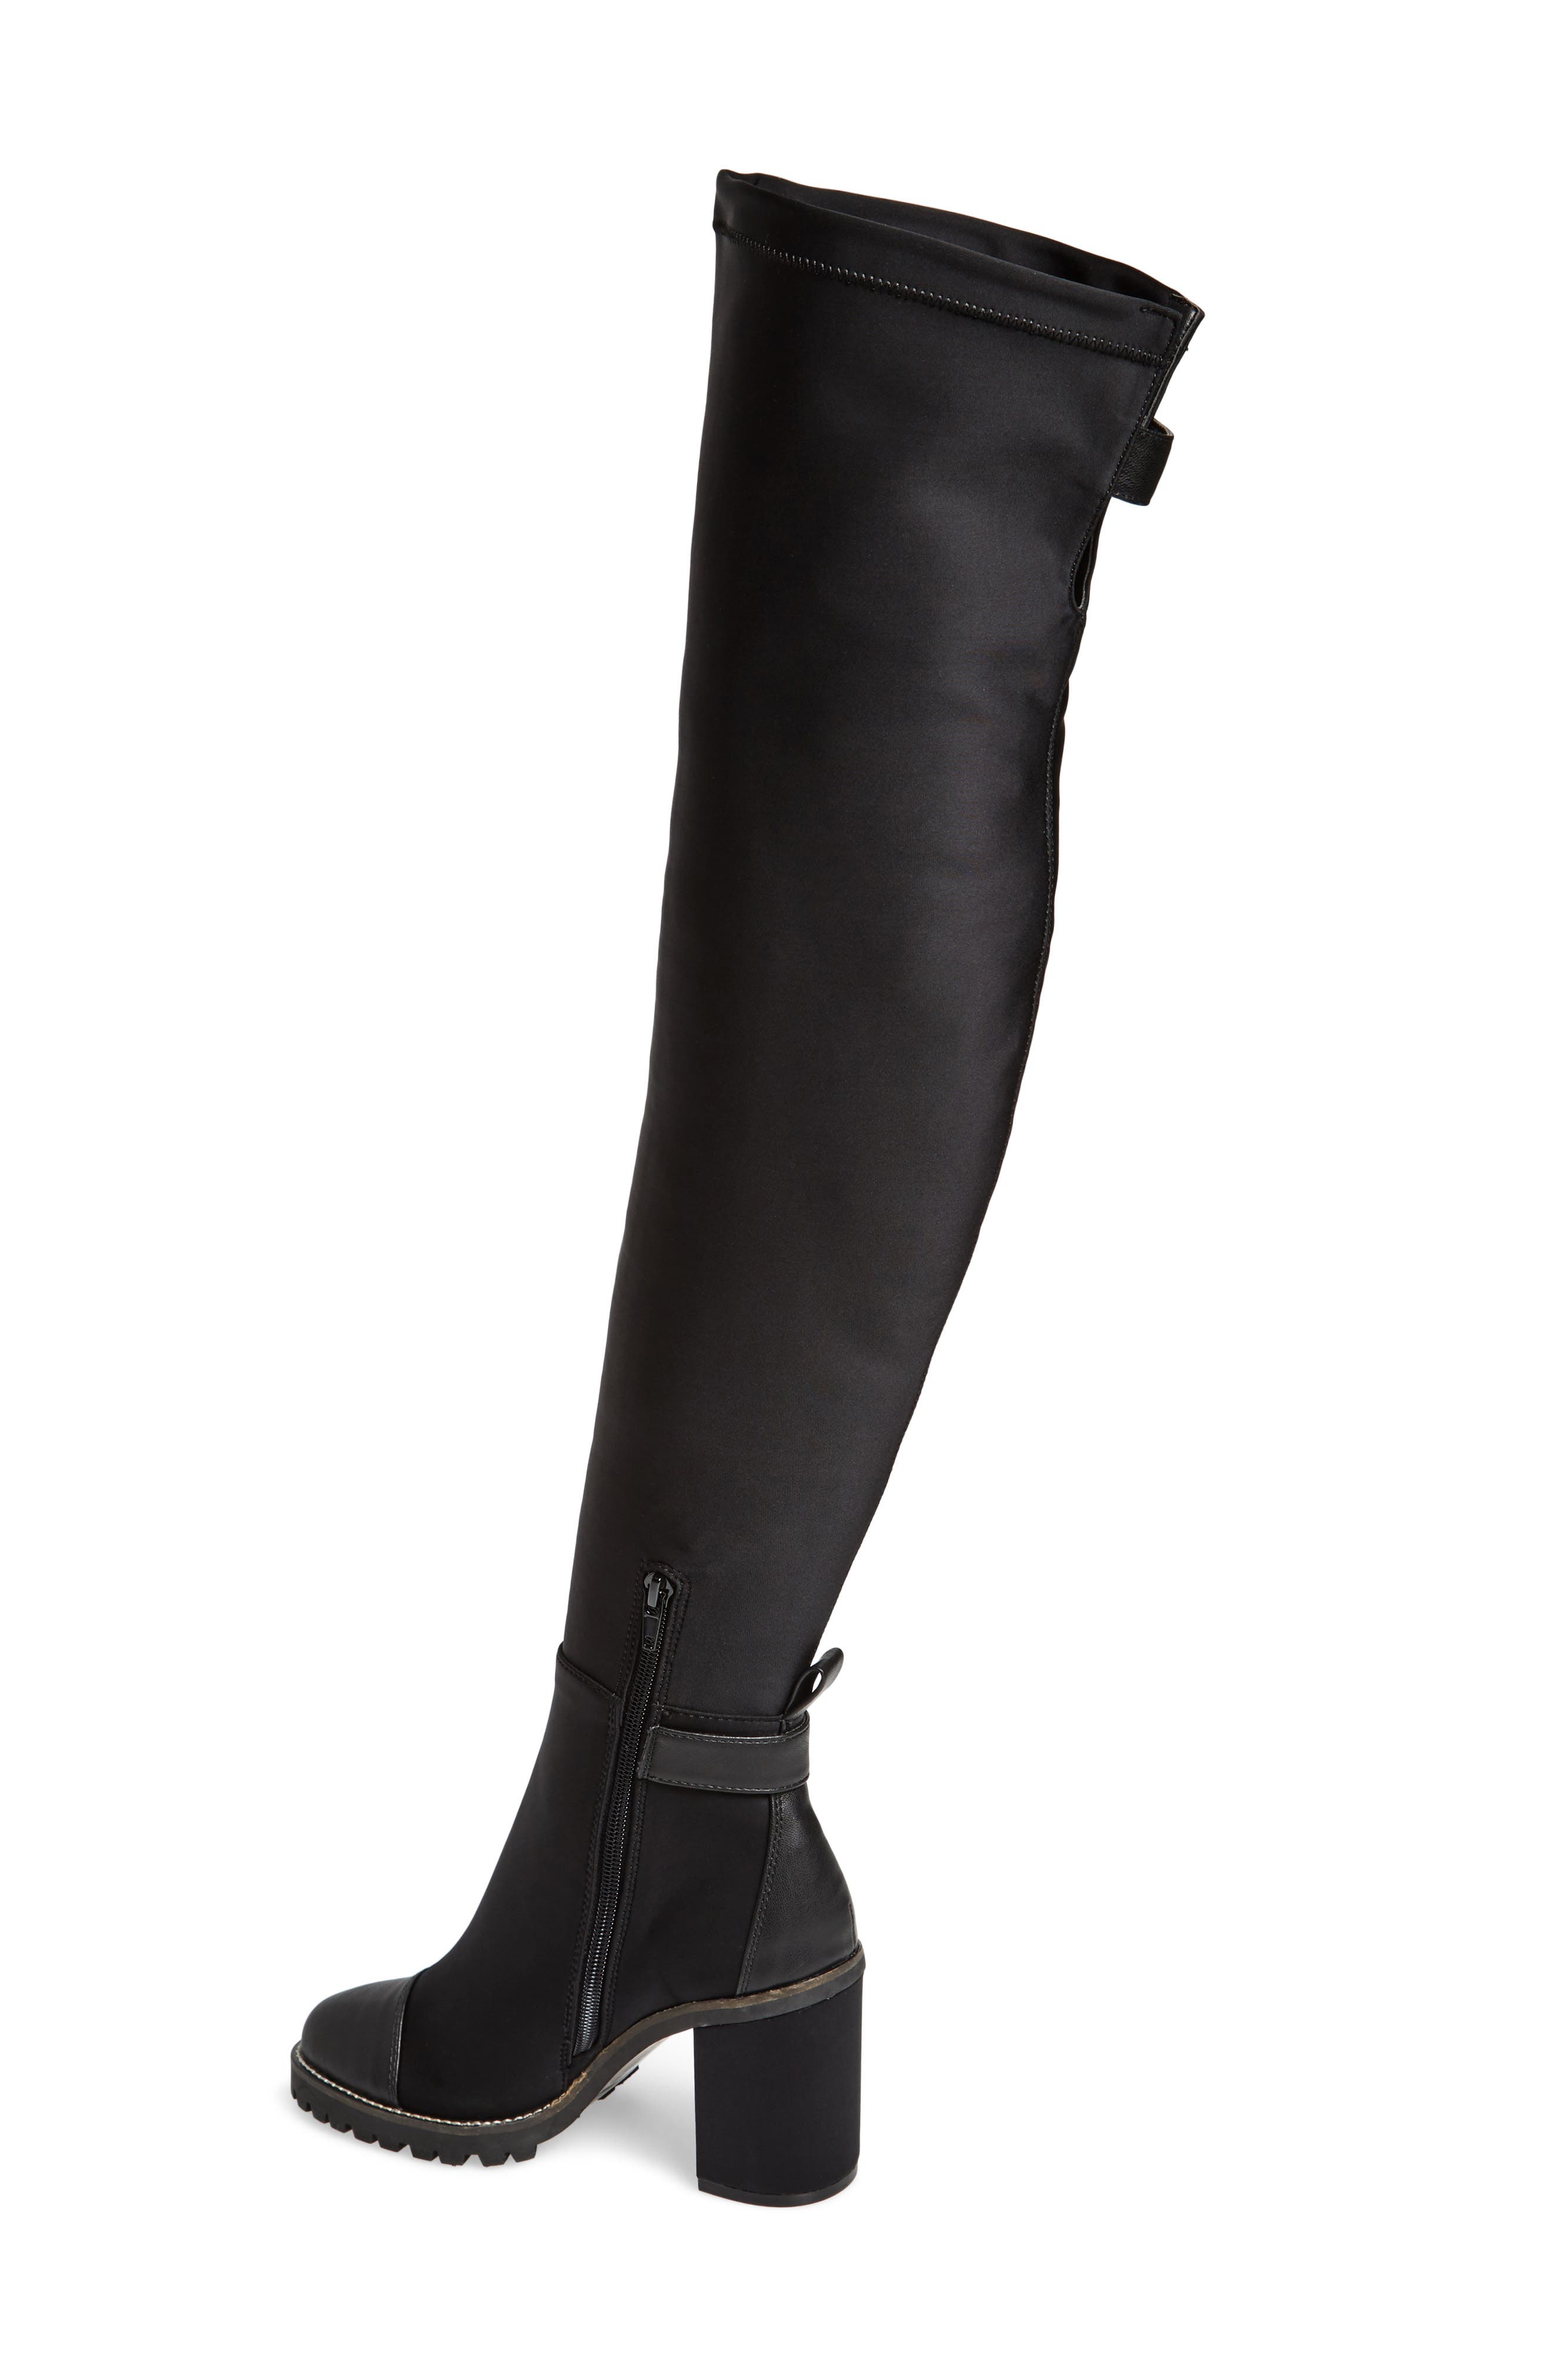 jerry over the knee lug sole boot